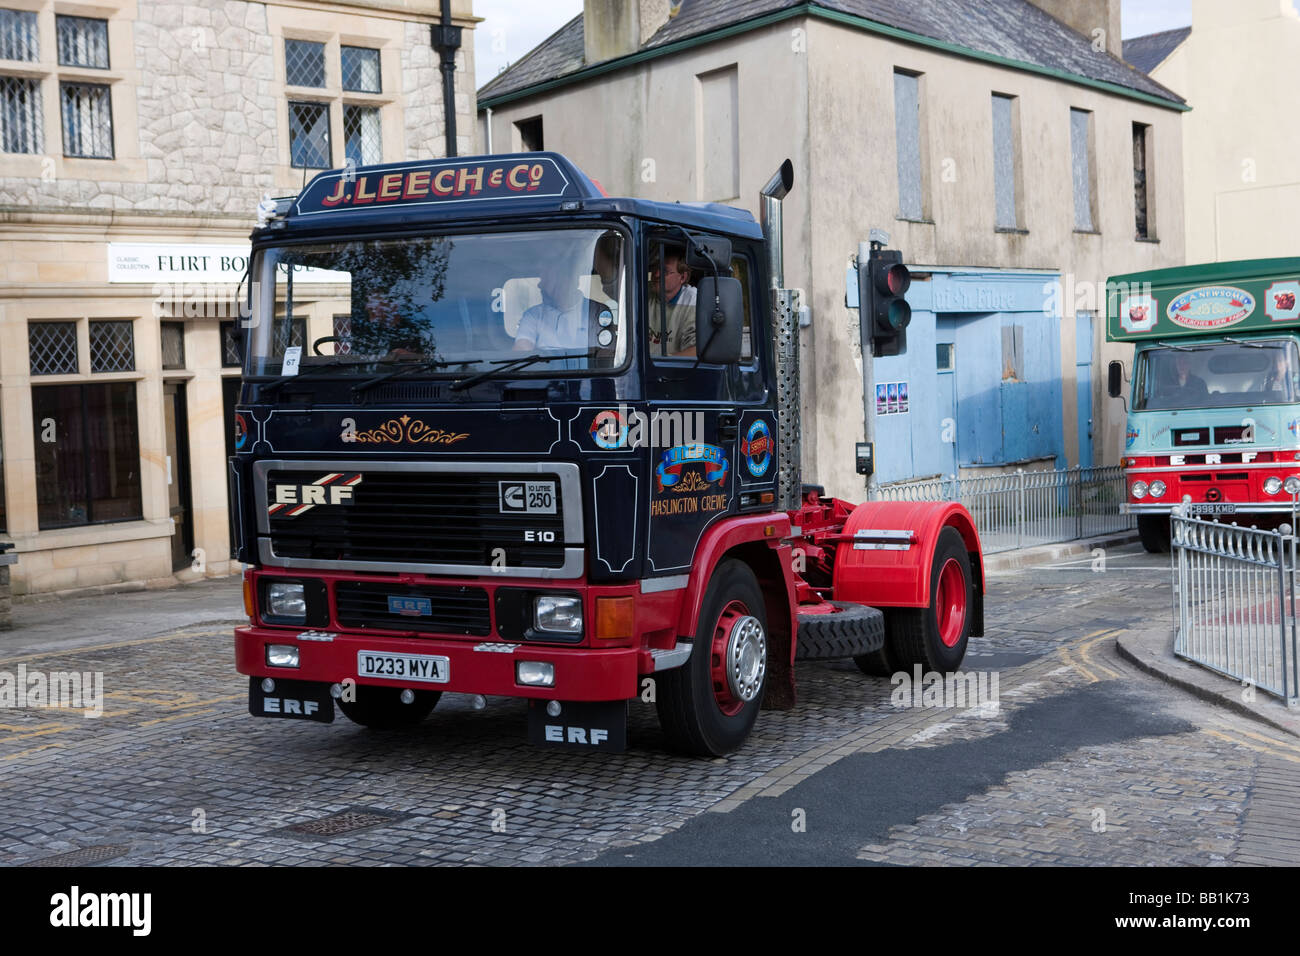 ERF. Alte Autos in Conwy. Nord-Wales. Europa Stockfoto